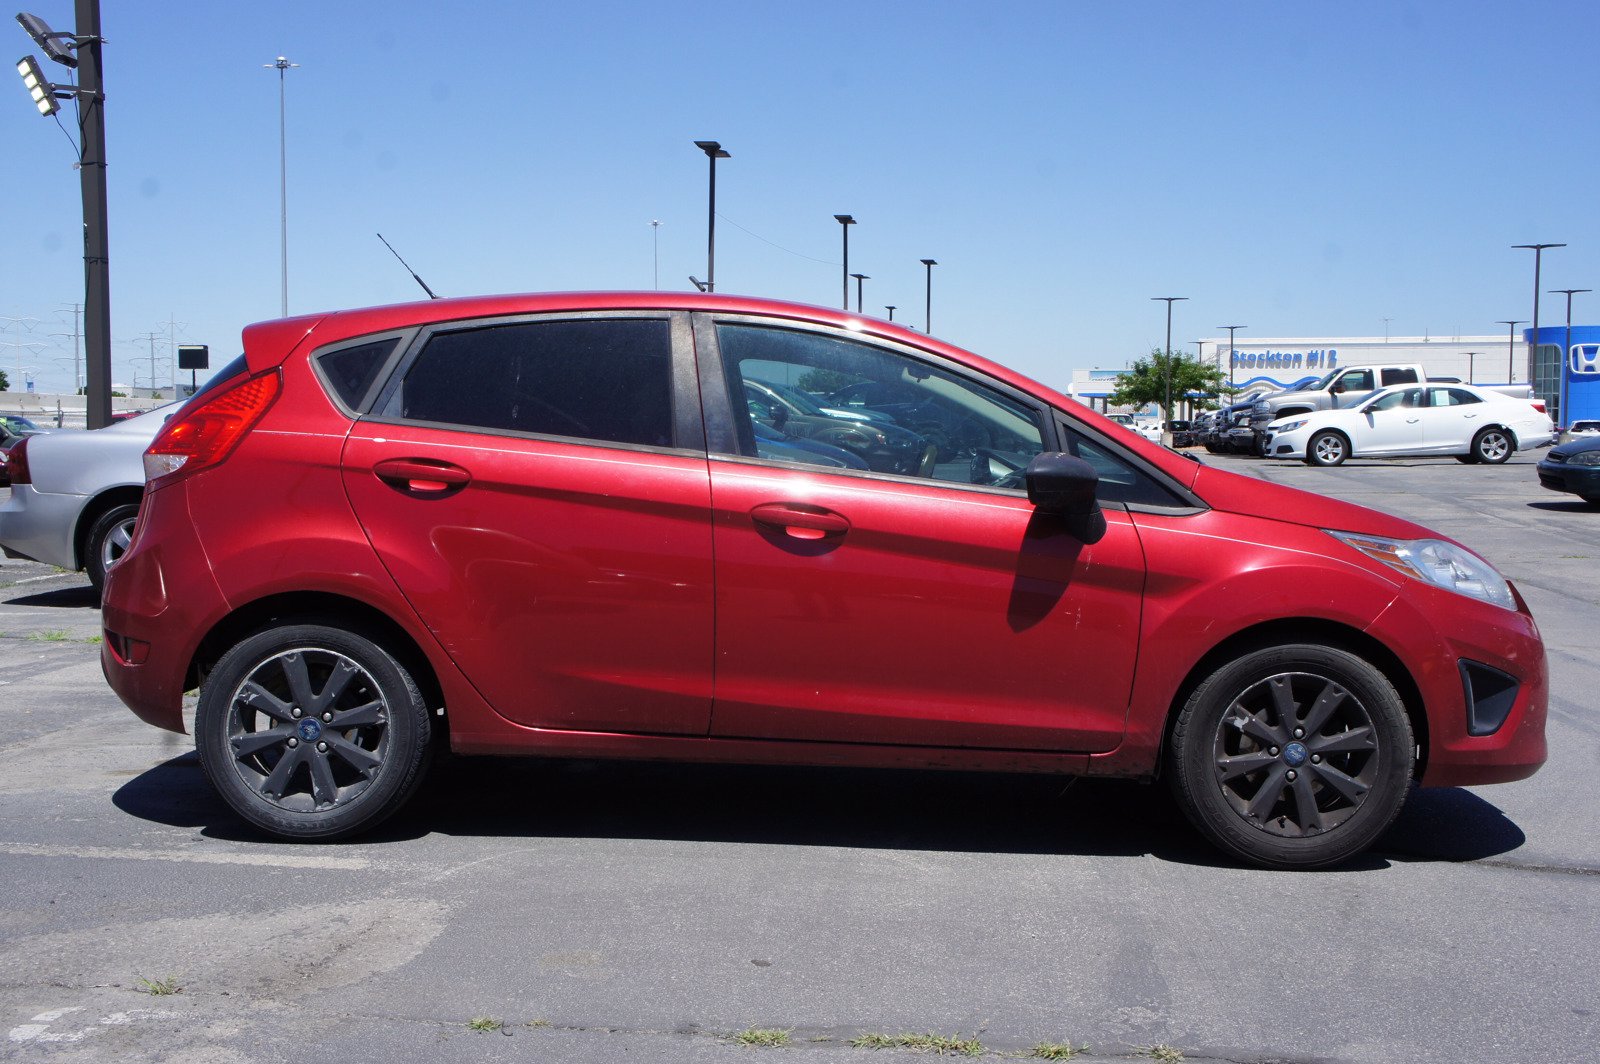 PreOwned 2011 Ford Fiesta SE Hatchback in Sandy S8216A